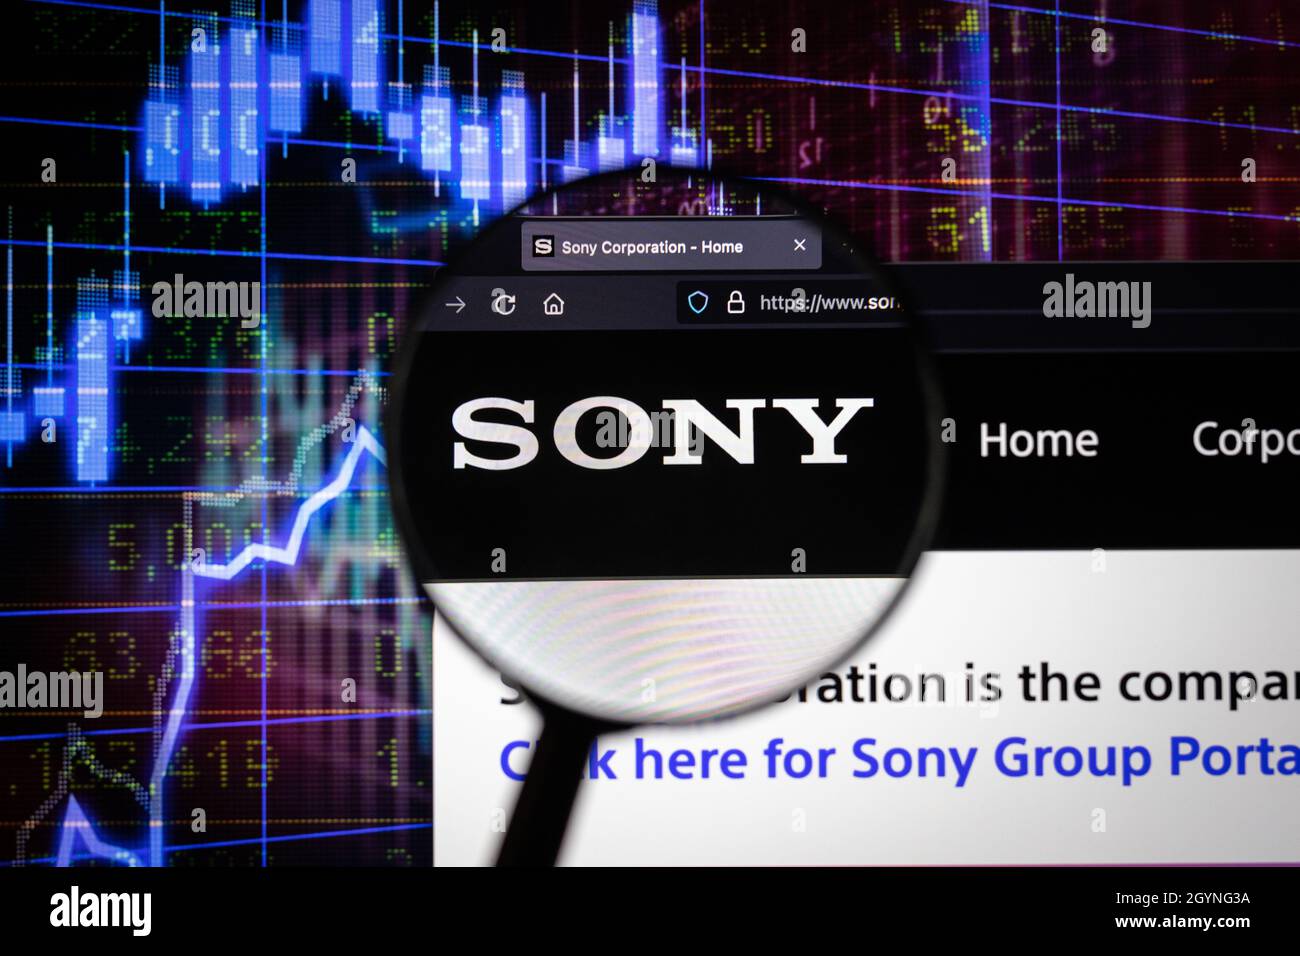 Sony company logo on a website with blurry stock market developments in the background, seen on a computer screen through a magnifying glass Stock Photo